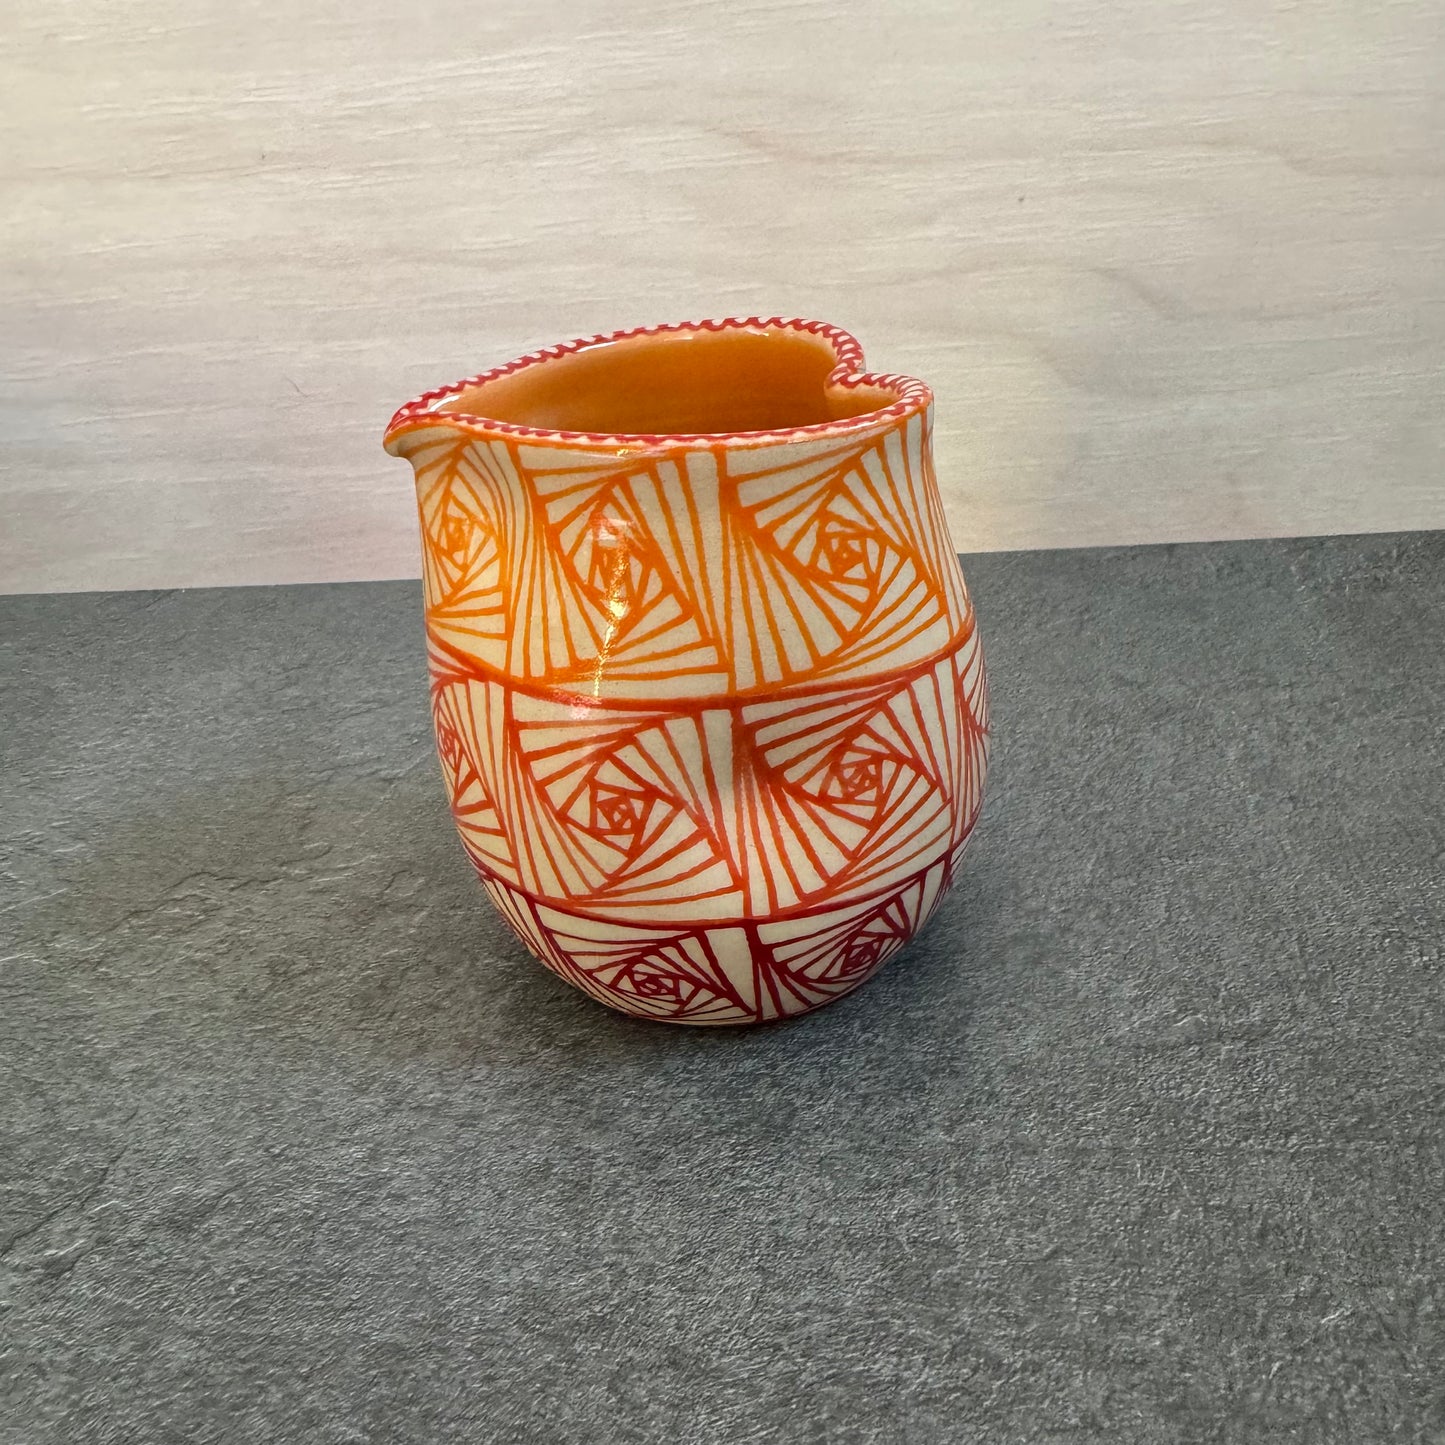 Heart Cup with Red Orange Peach Ombre Design